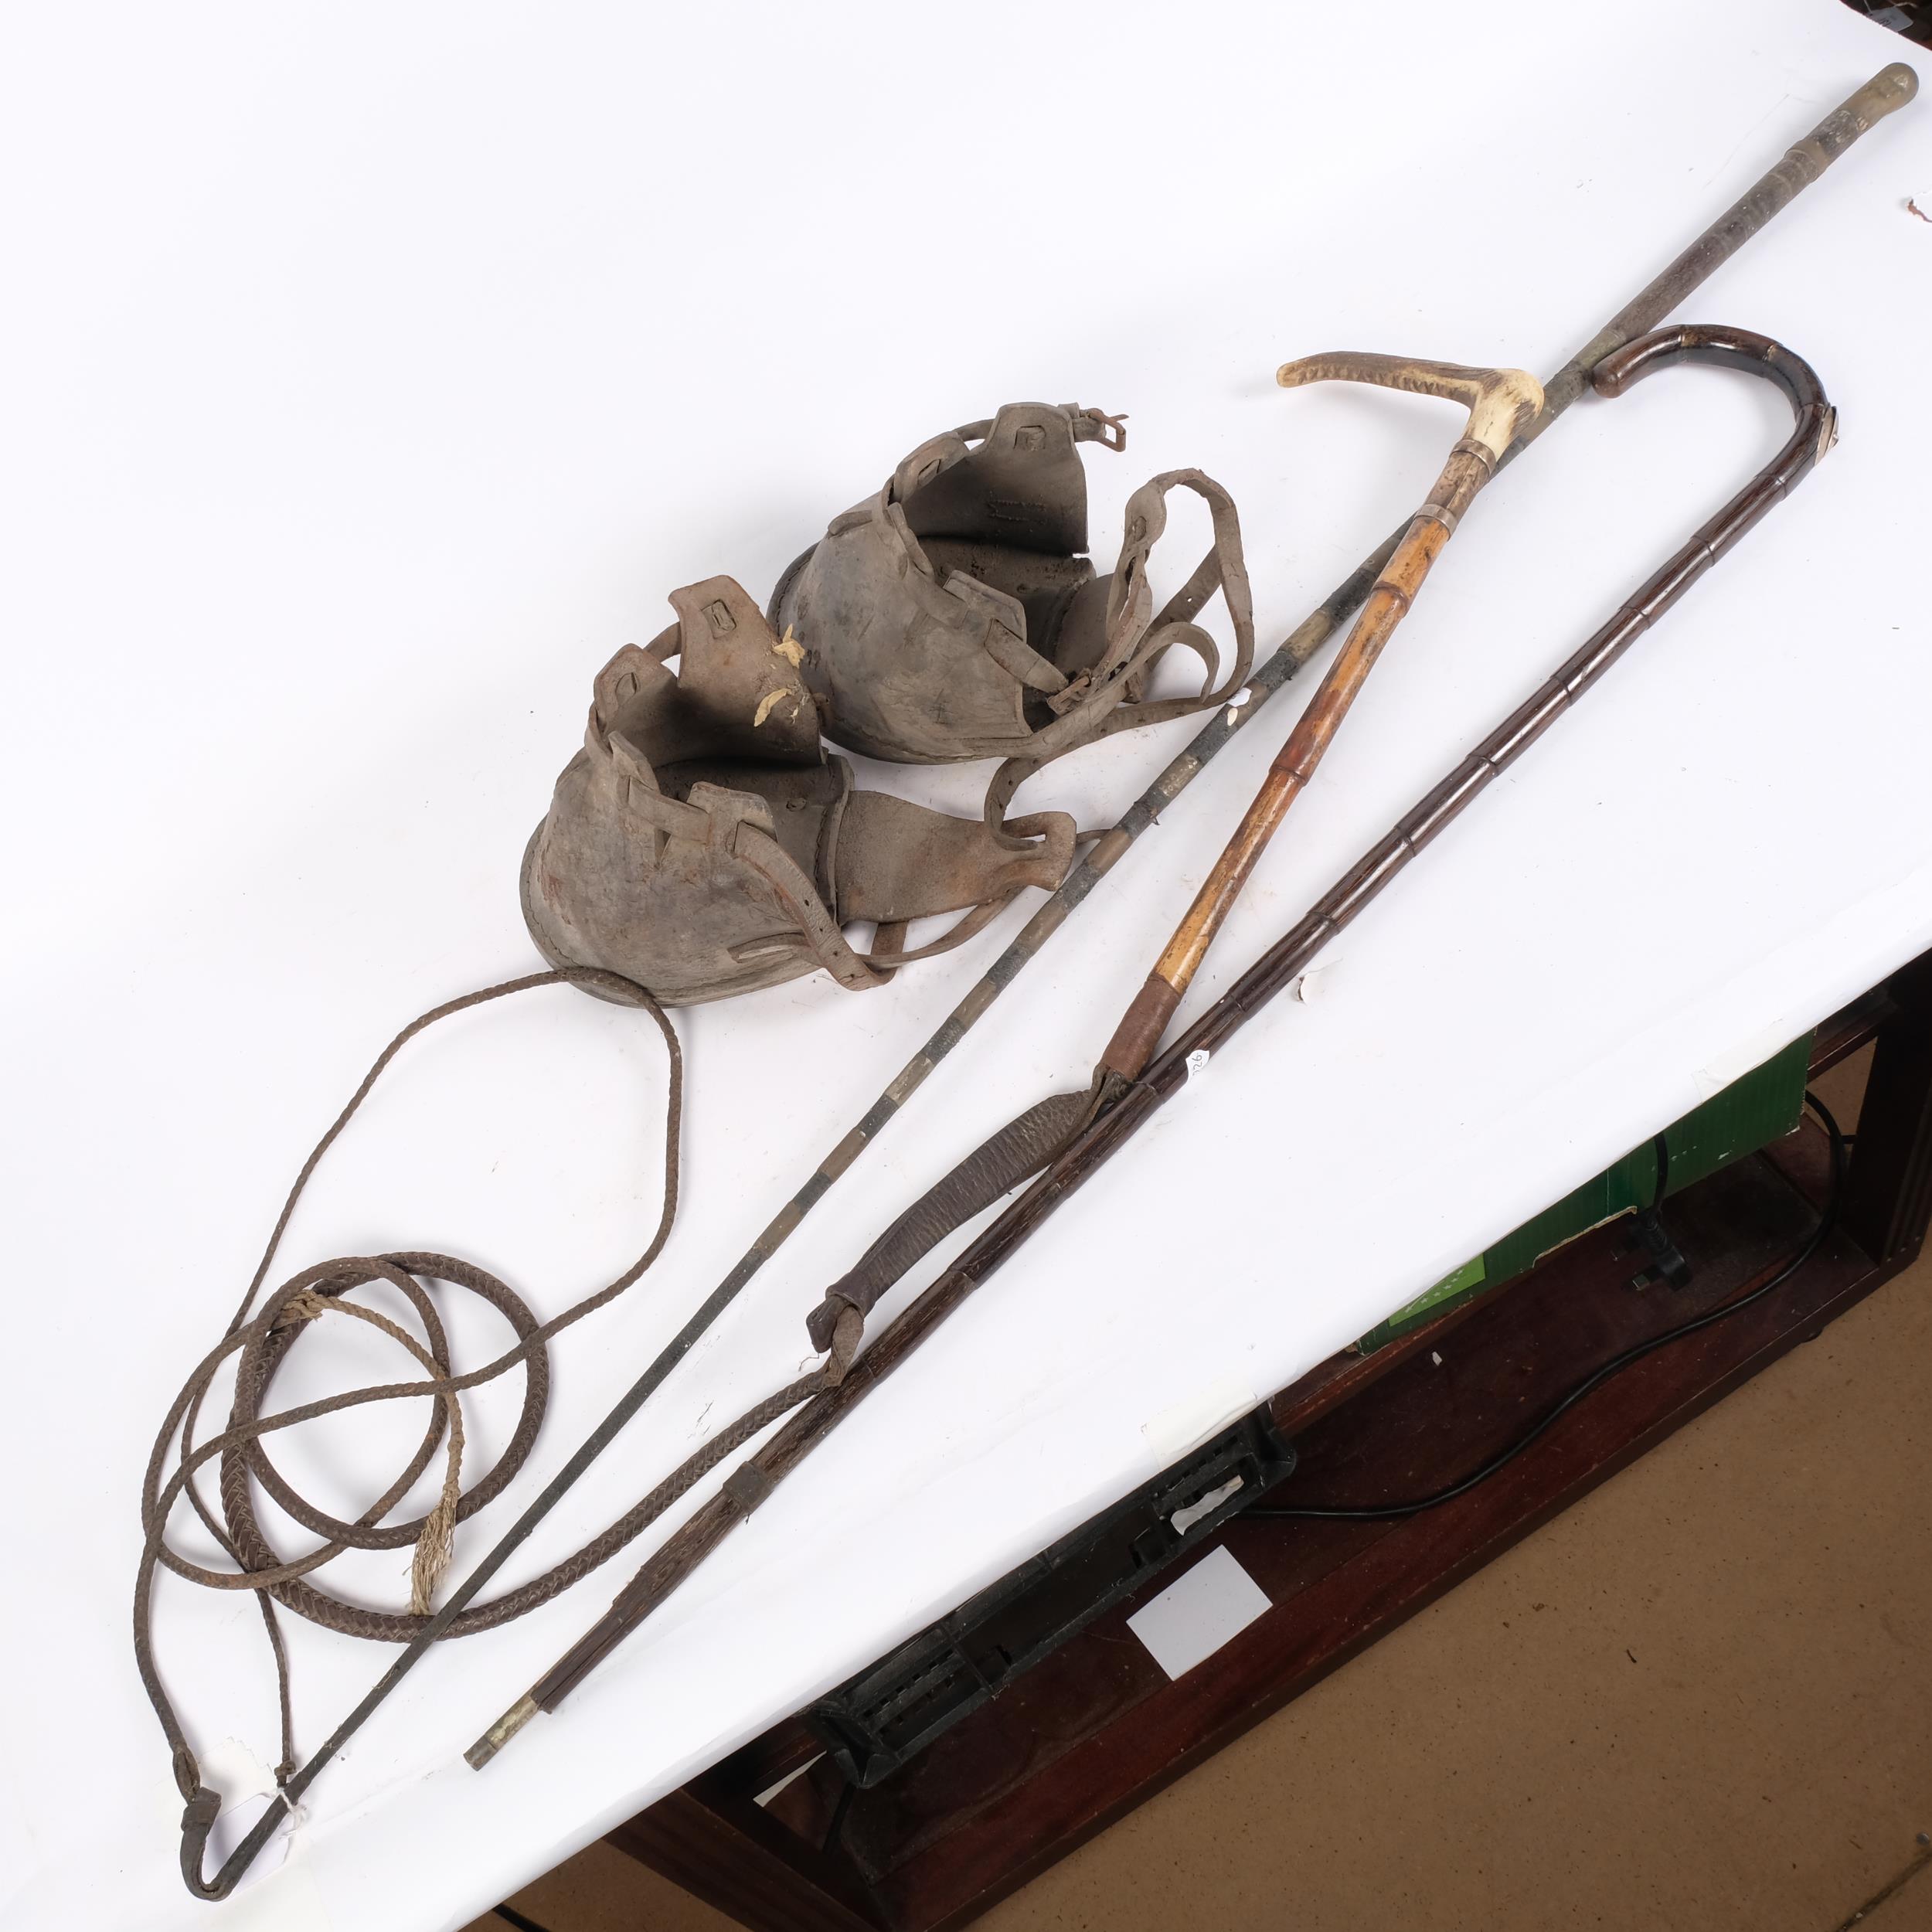 A group of equine associated items, including a horse measuring walking cane, carriage whip, horn- - Image 2 of 2